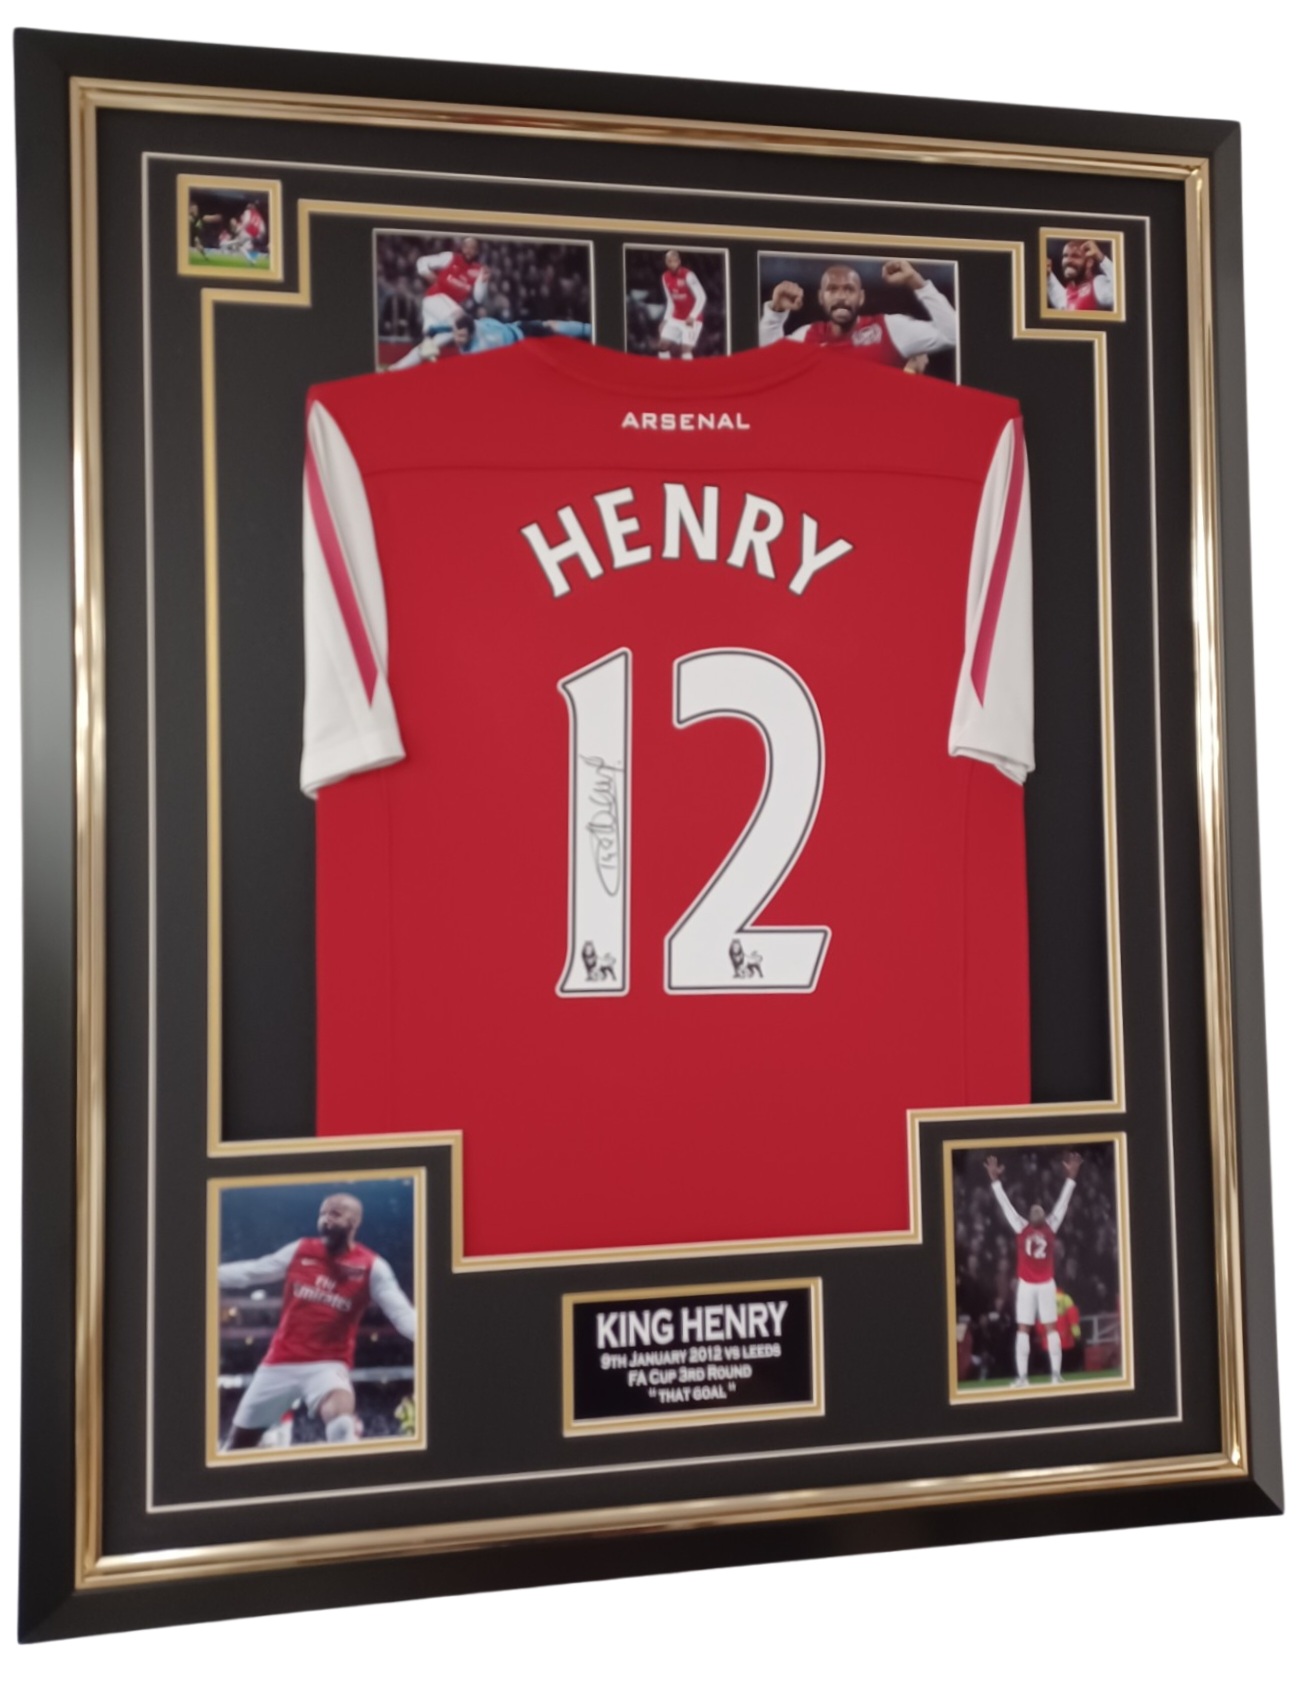 thierry henry signed shirt v leeds fa cup